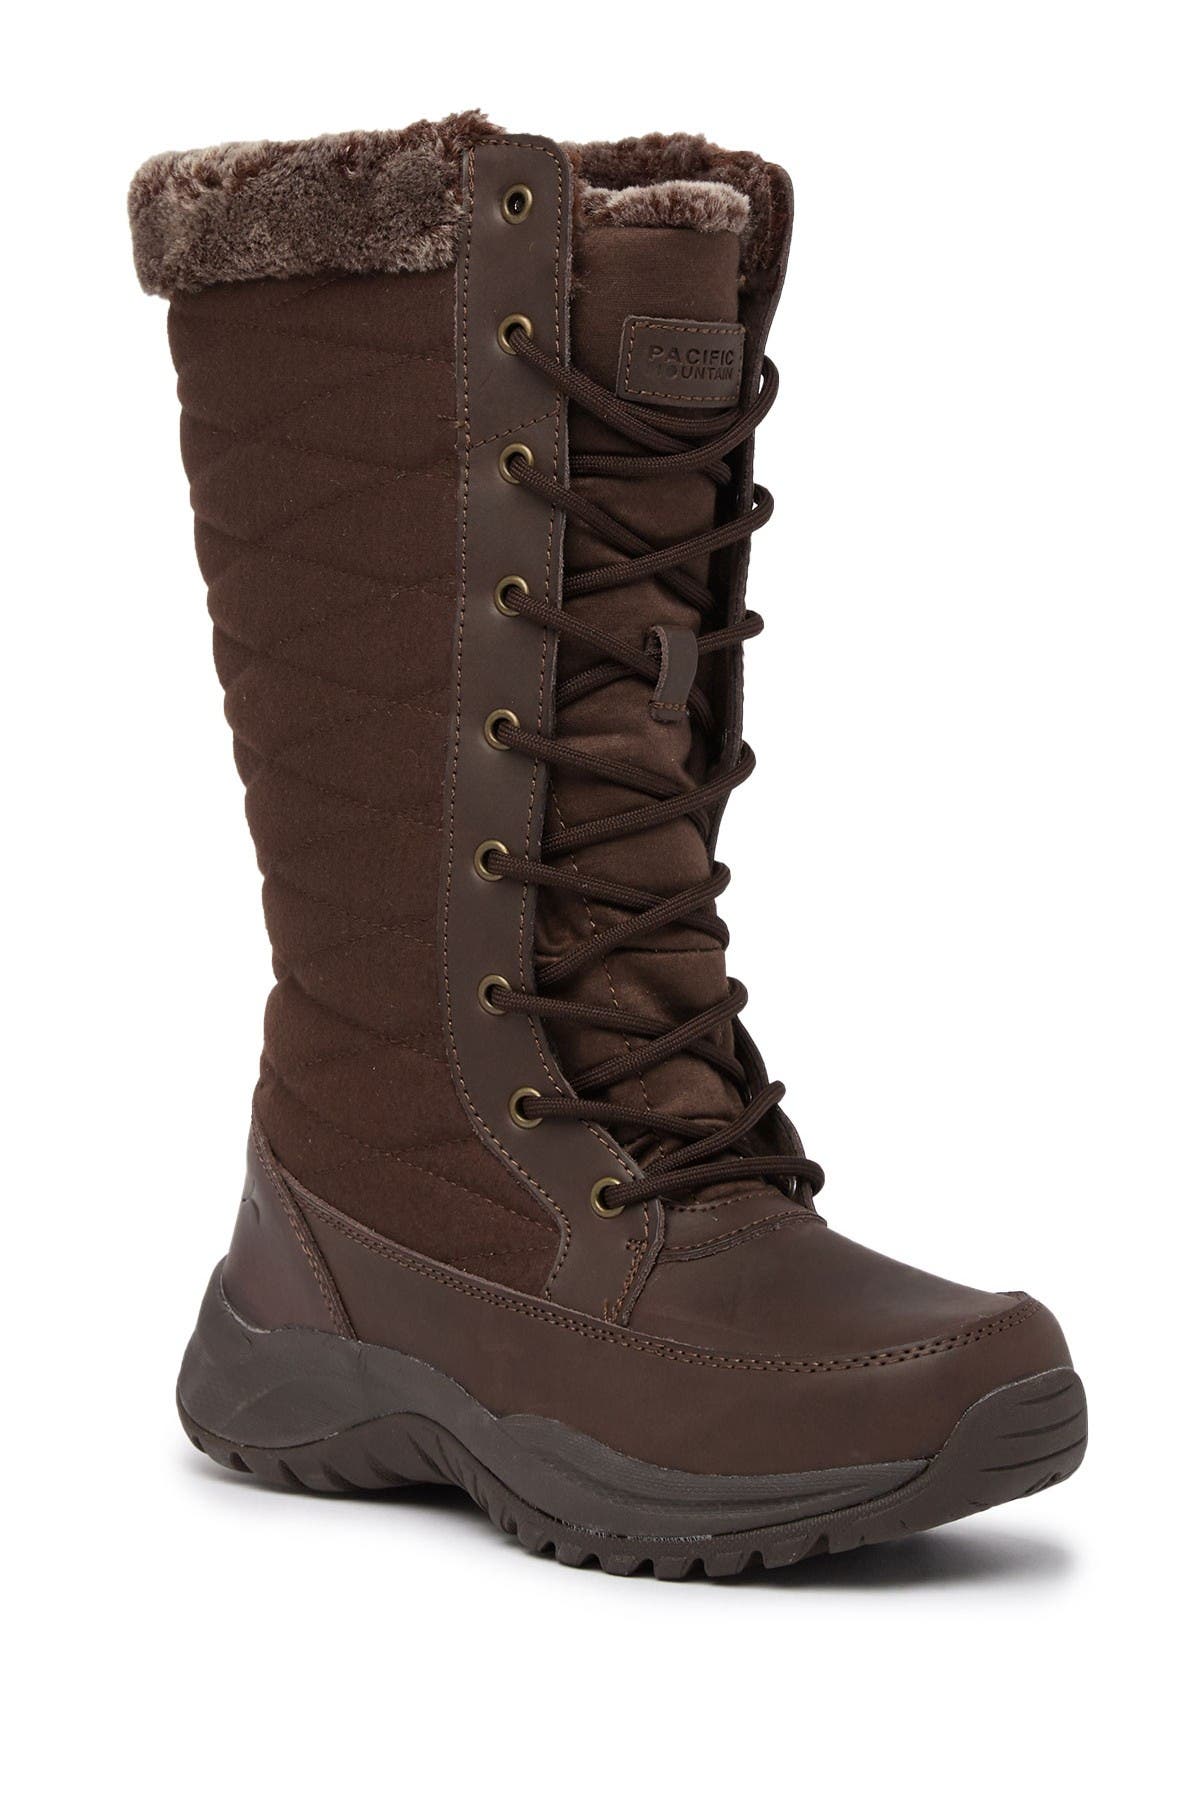 Snow Boots Clearance | Nordstrom Rack